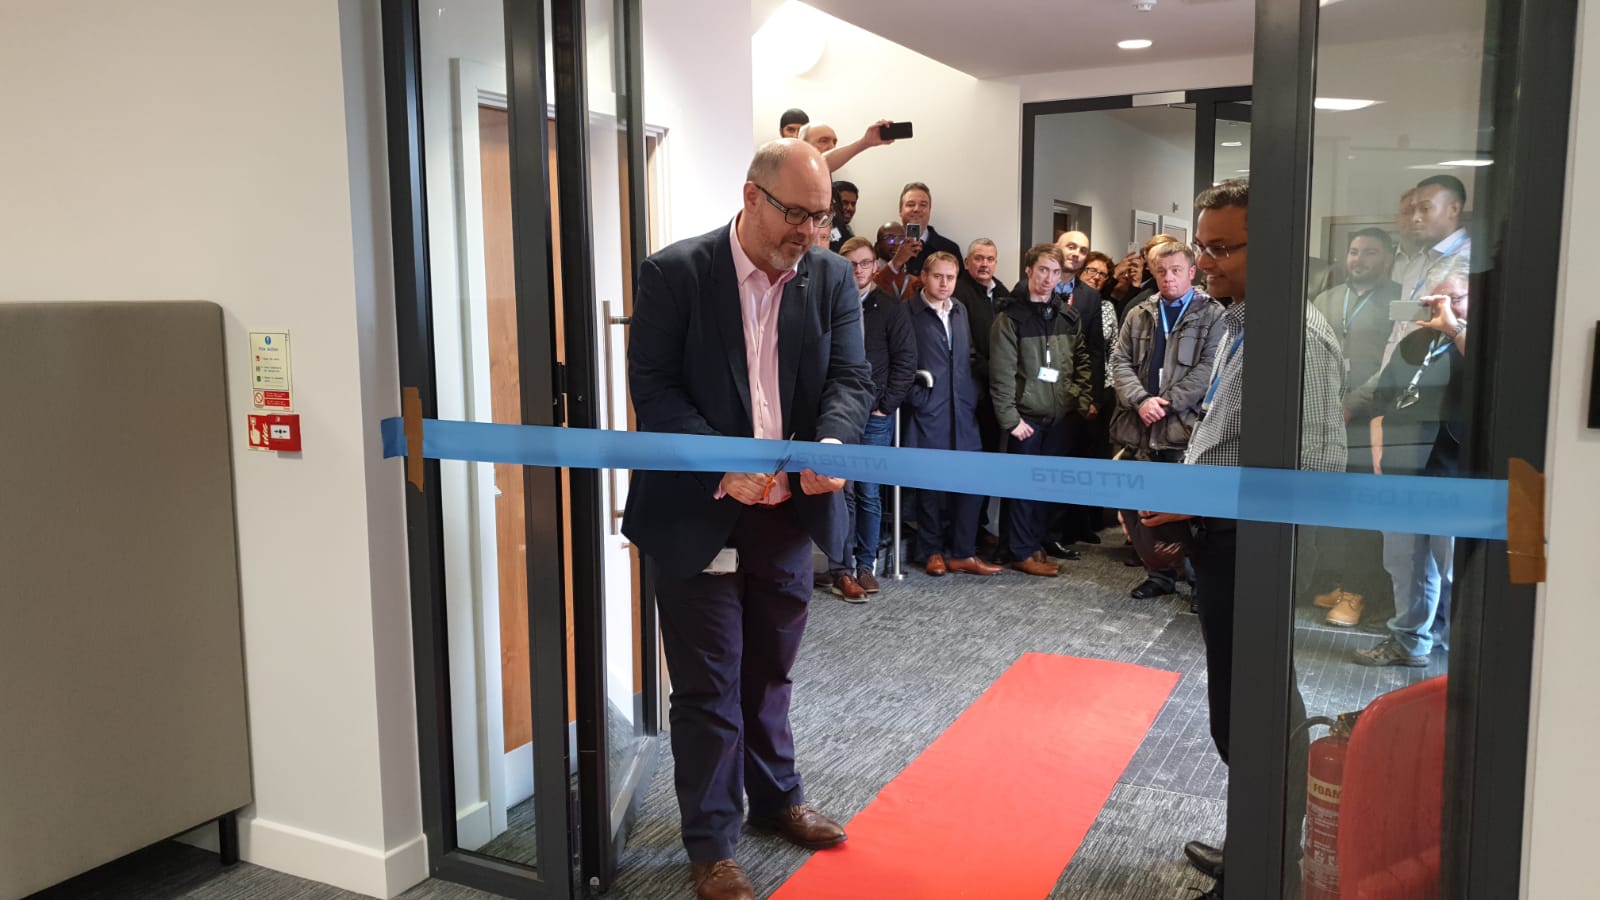 NTT DATA underpins its commitment to the Midlands with the opening of a new Birmingham Delivery Centre